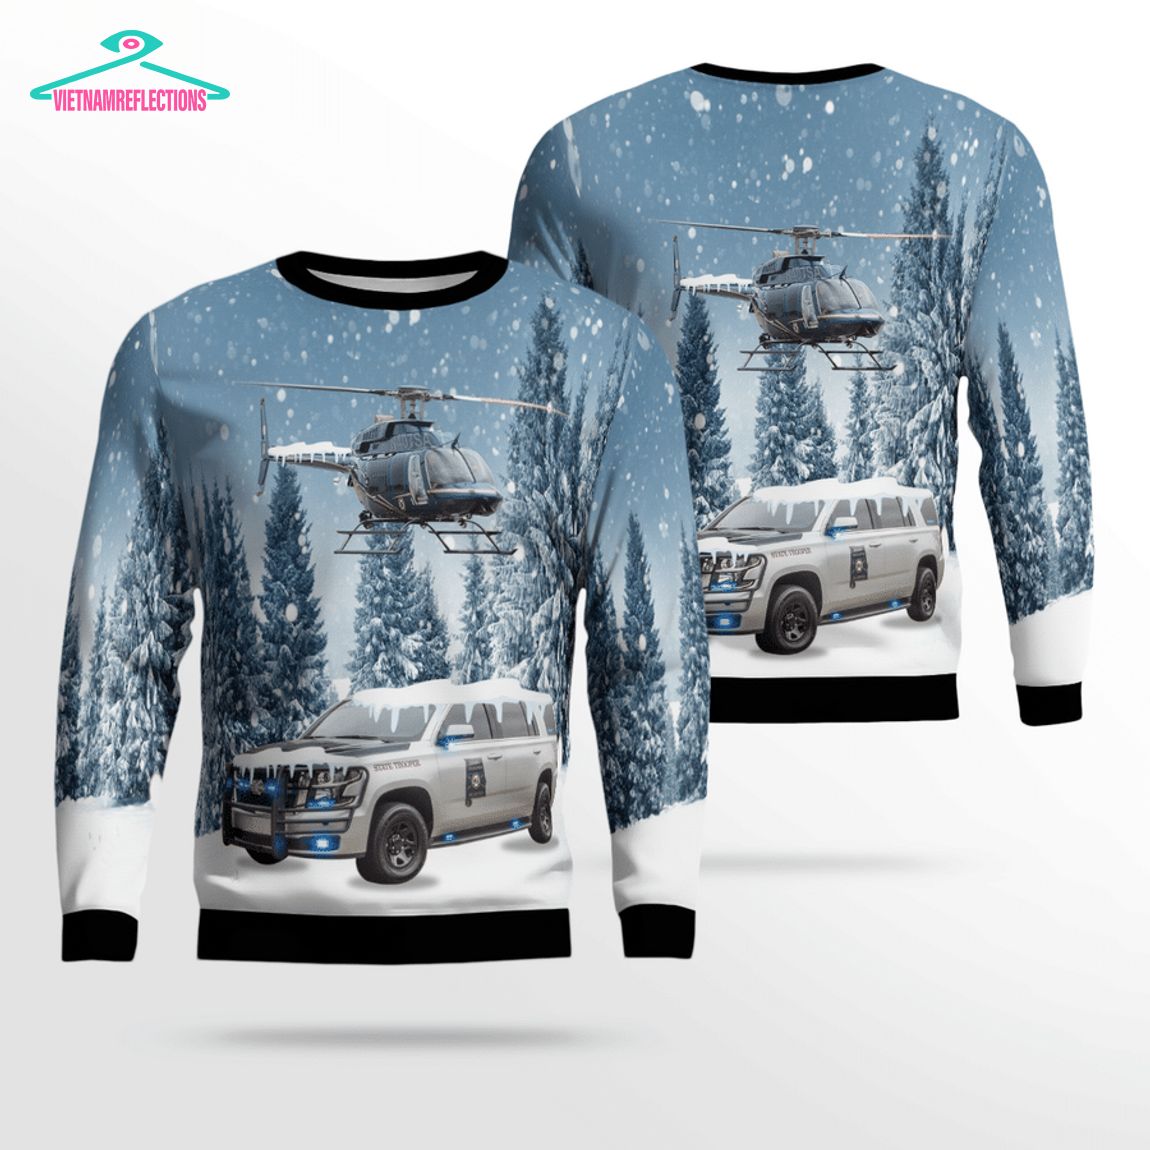 Alabama State Troopers Ver 2 3D Christmas Sweater - Nice bread, I like it